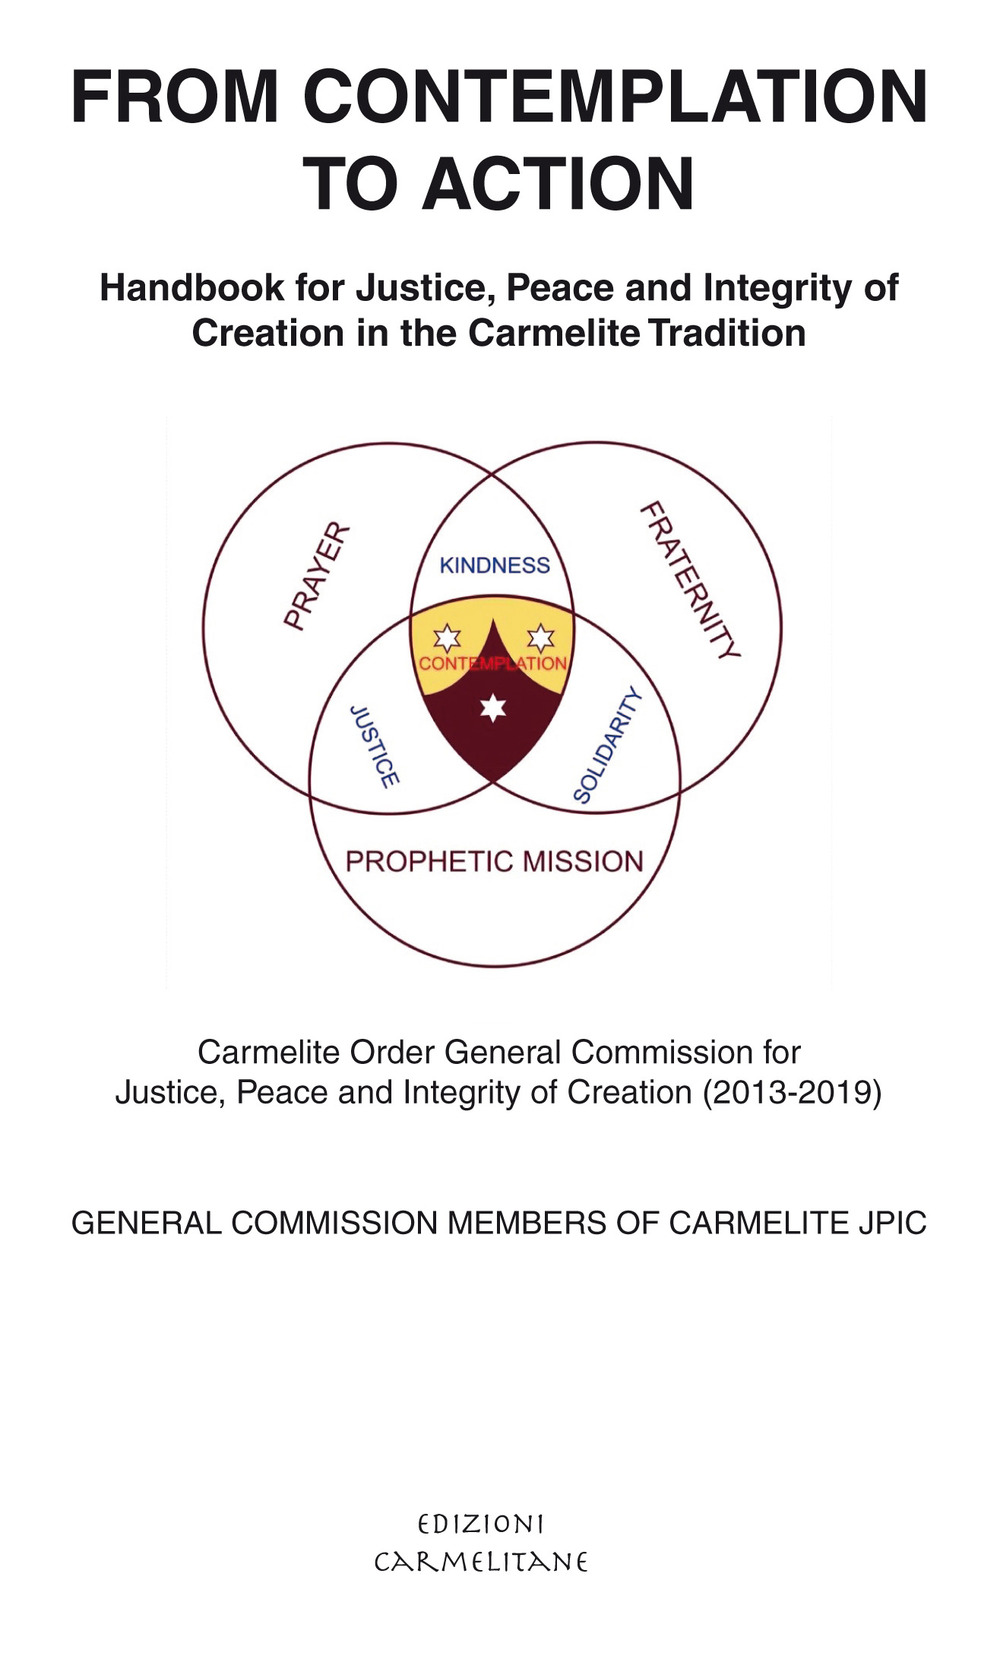 From contemplation to action. Handbook for justice, peace and integrity of creation in the carmelite tradition